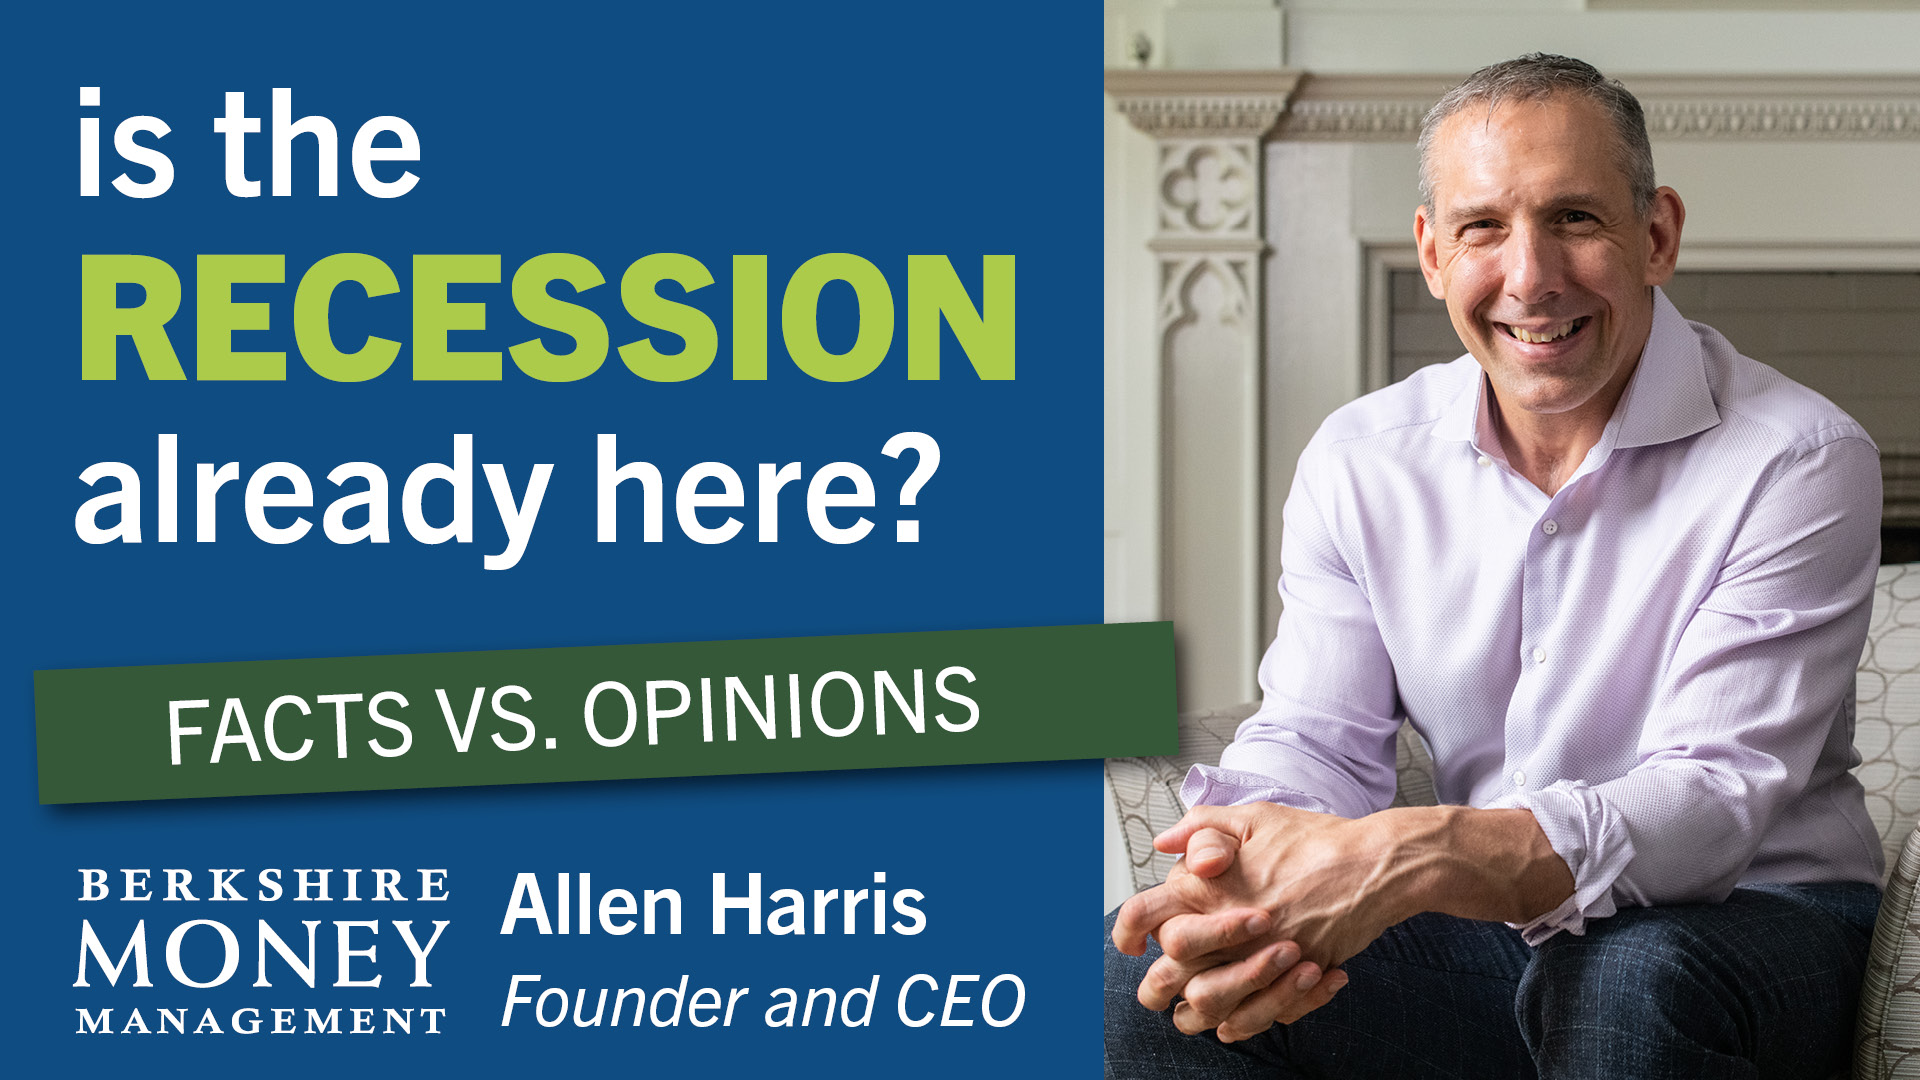 Is the RECESSION already here? Facts vs. Opinions